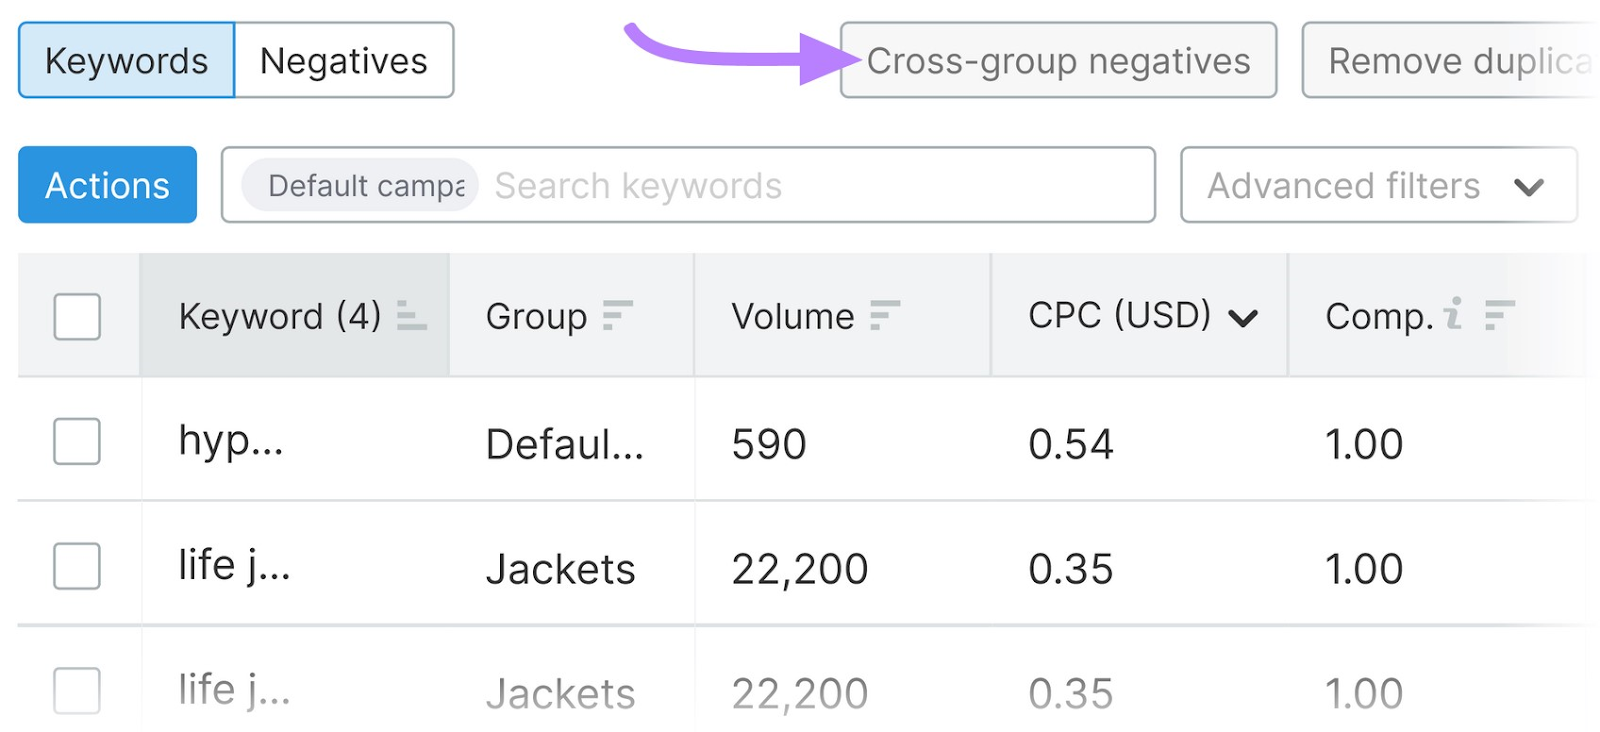 “Cross-group negatives” button selected